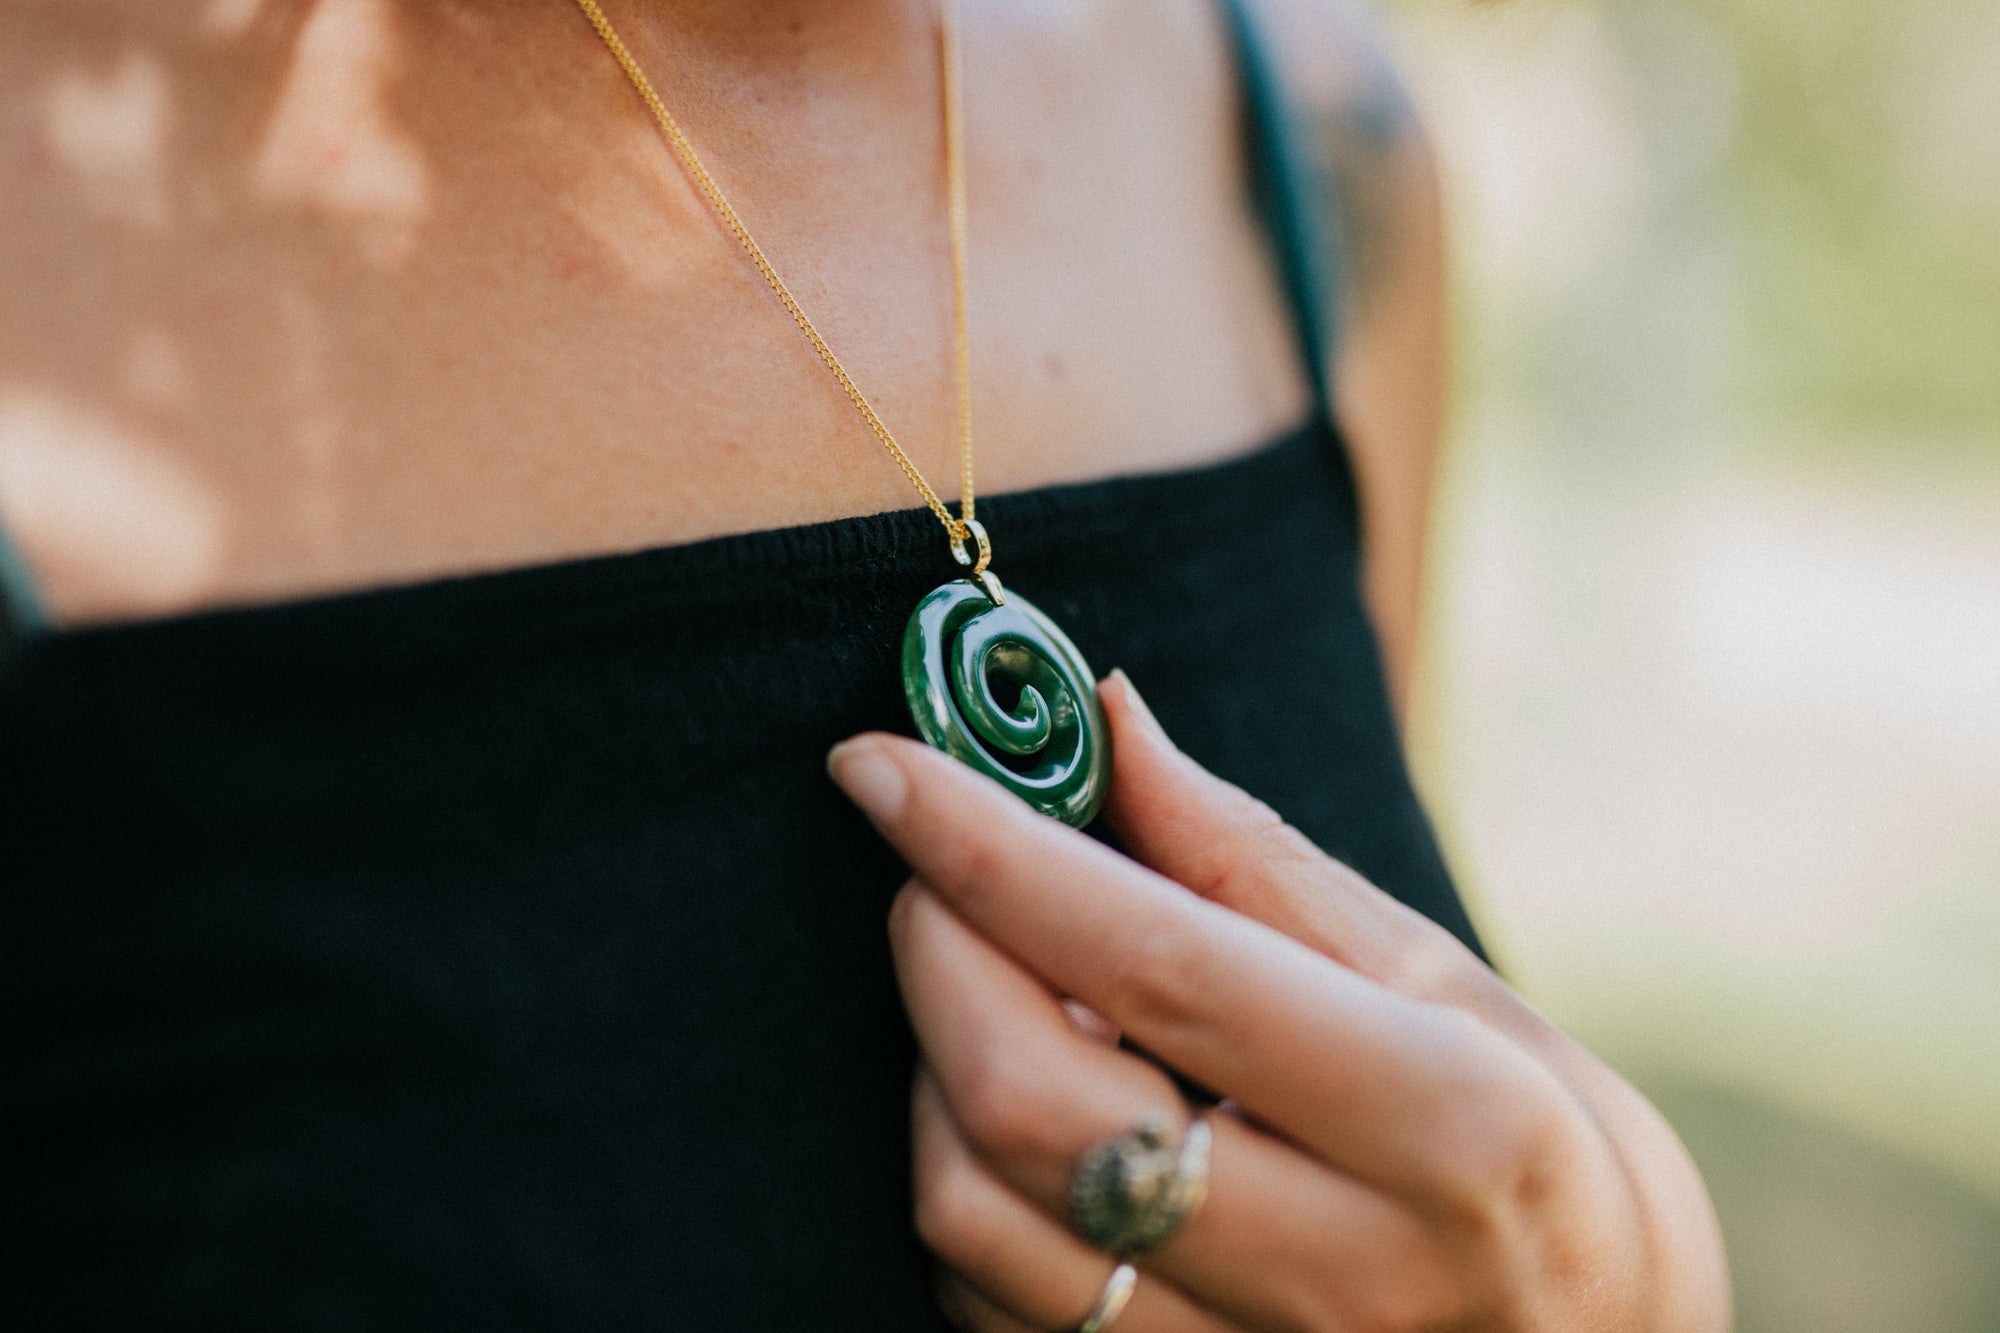 Our unique greenstone jewellery collections